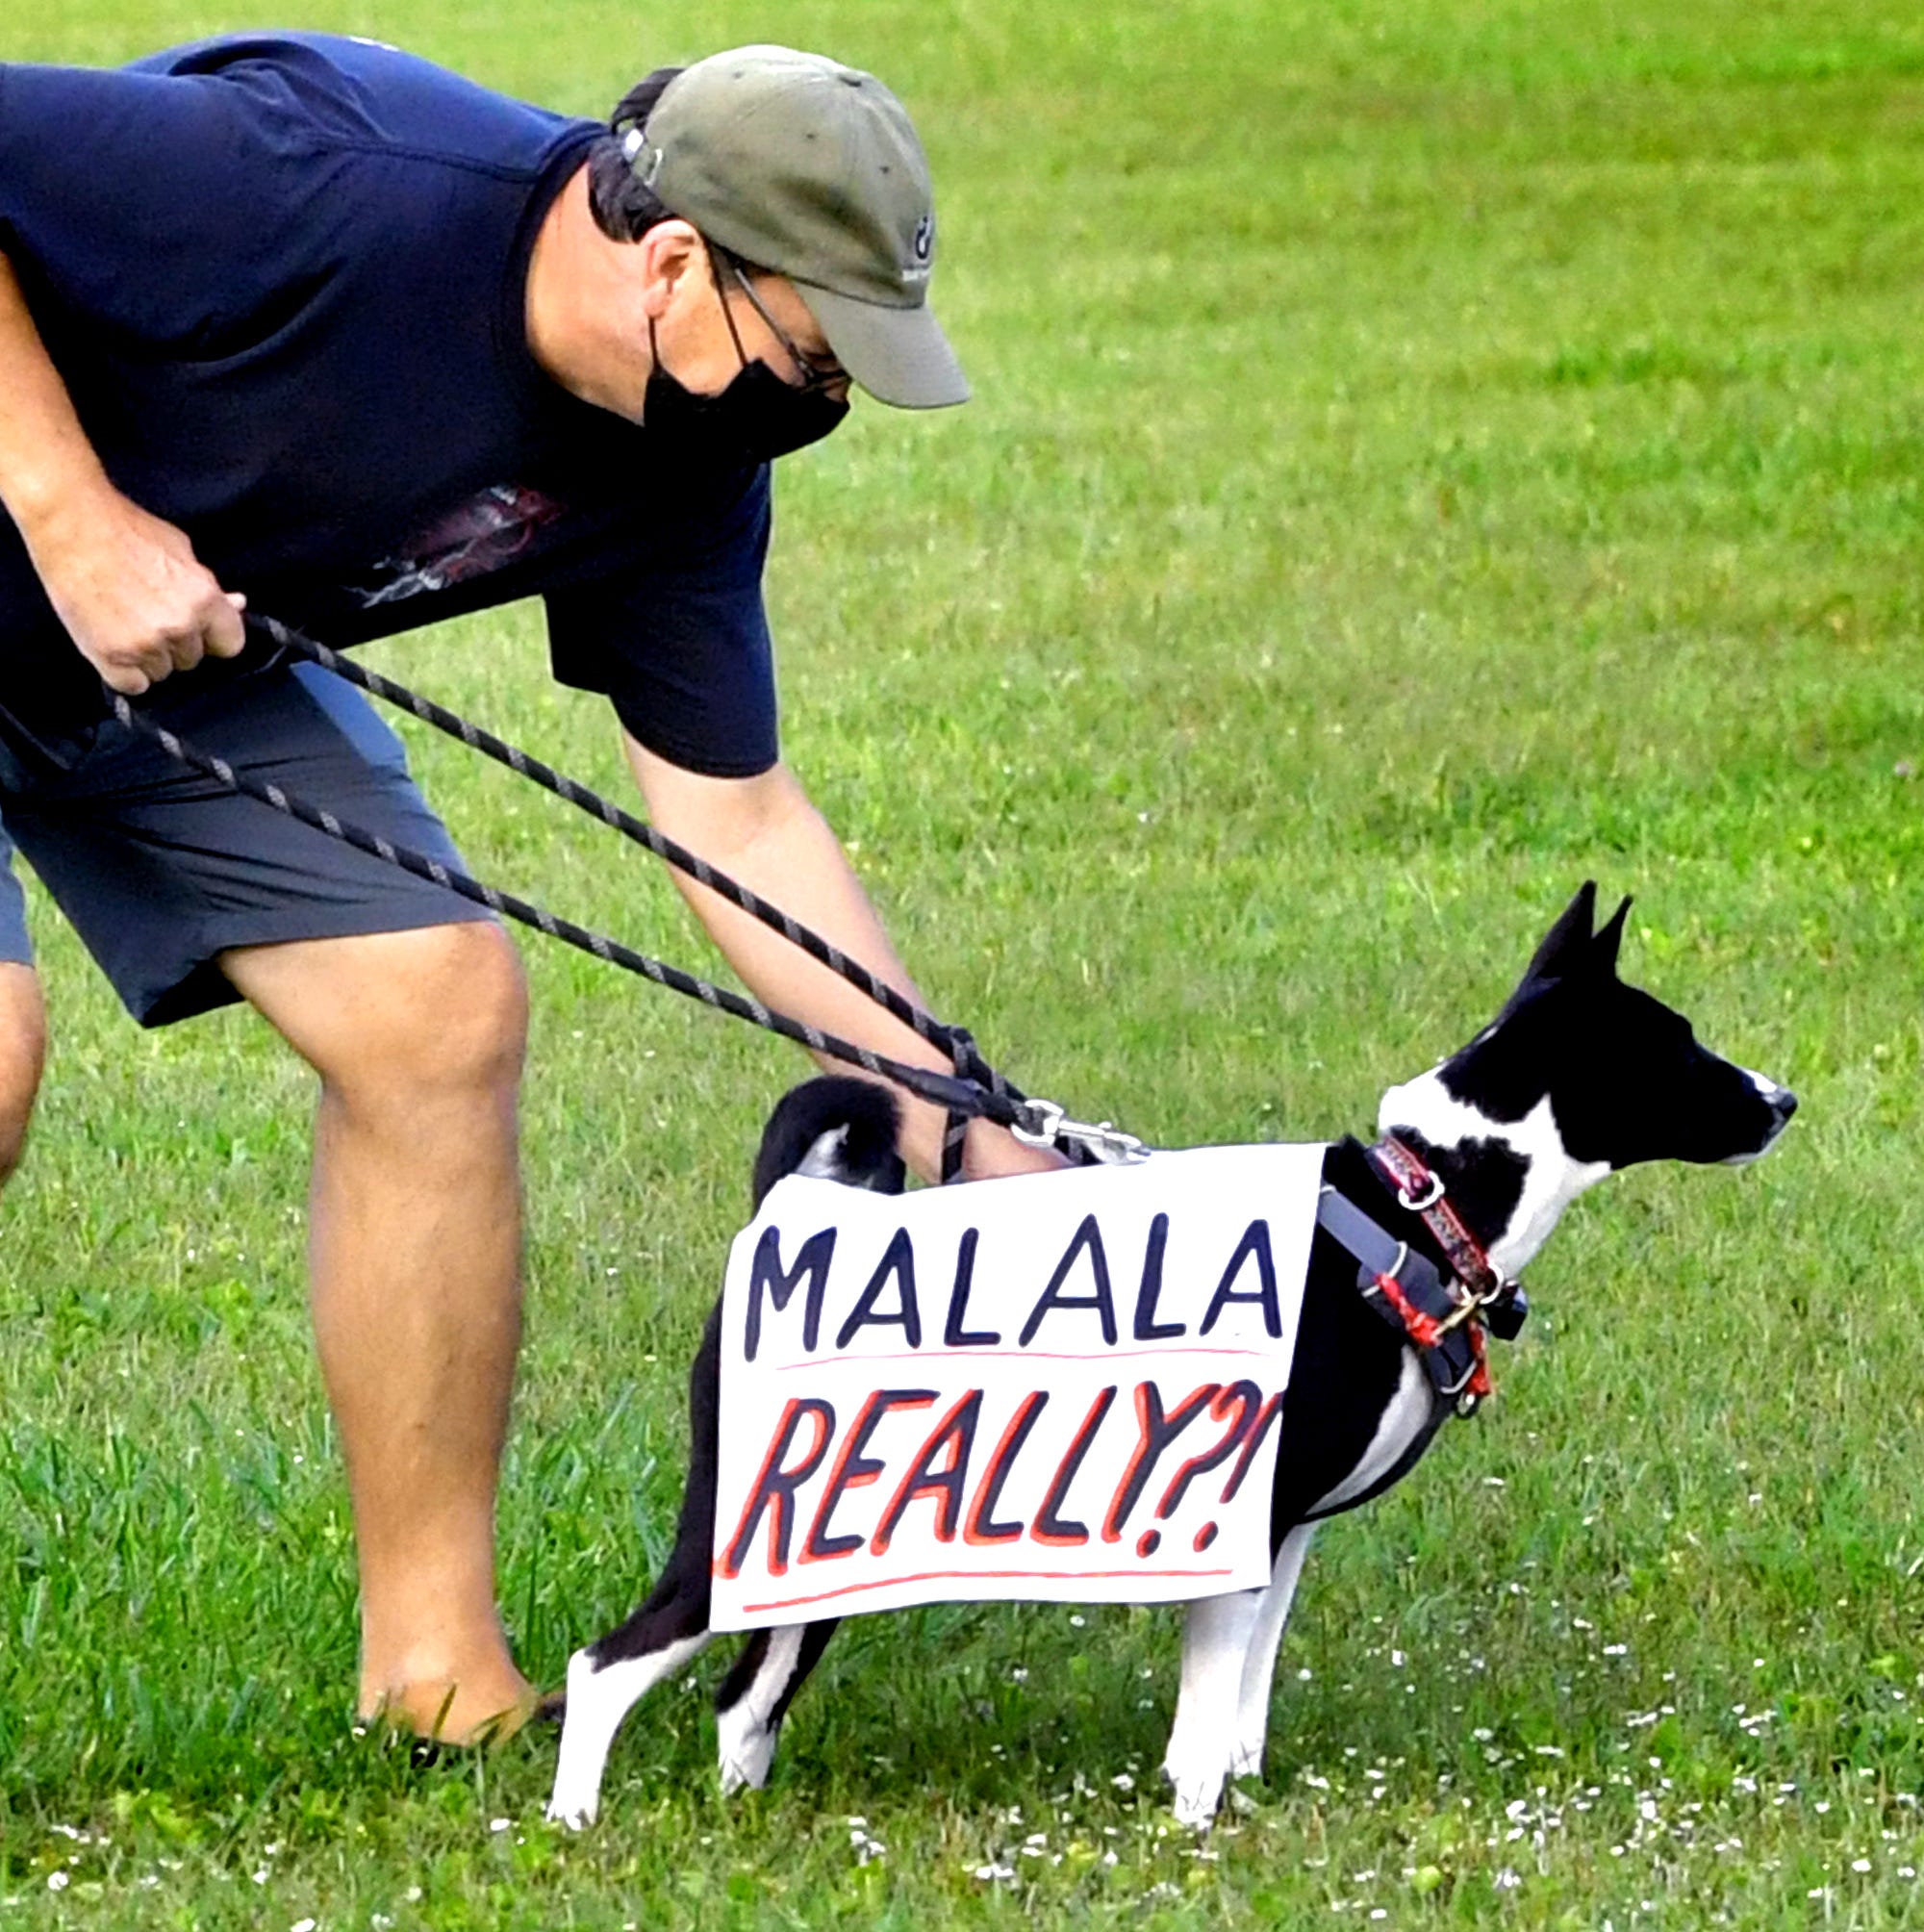 Tom Rayburn outfitted his dog Jagger with a sign referencing Pakistani activist Malala Yousafzai during a rally outside the Central York School District Administration offices before a school board meeting there Monday, Sept. 20, 2021. Rayburn's wife is a teacher in the district. The rally was in opposition to a banned resource list instituted by the district, which demonstrators say targets minority authors. District officials added formal discussion of the ban to Monday's agenda. Bill Kalina photo